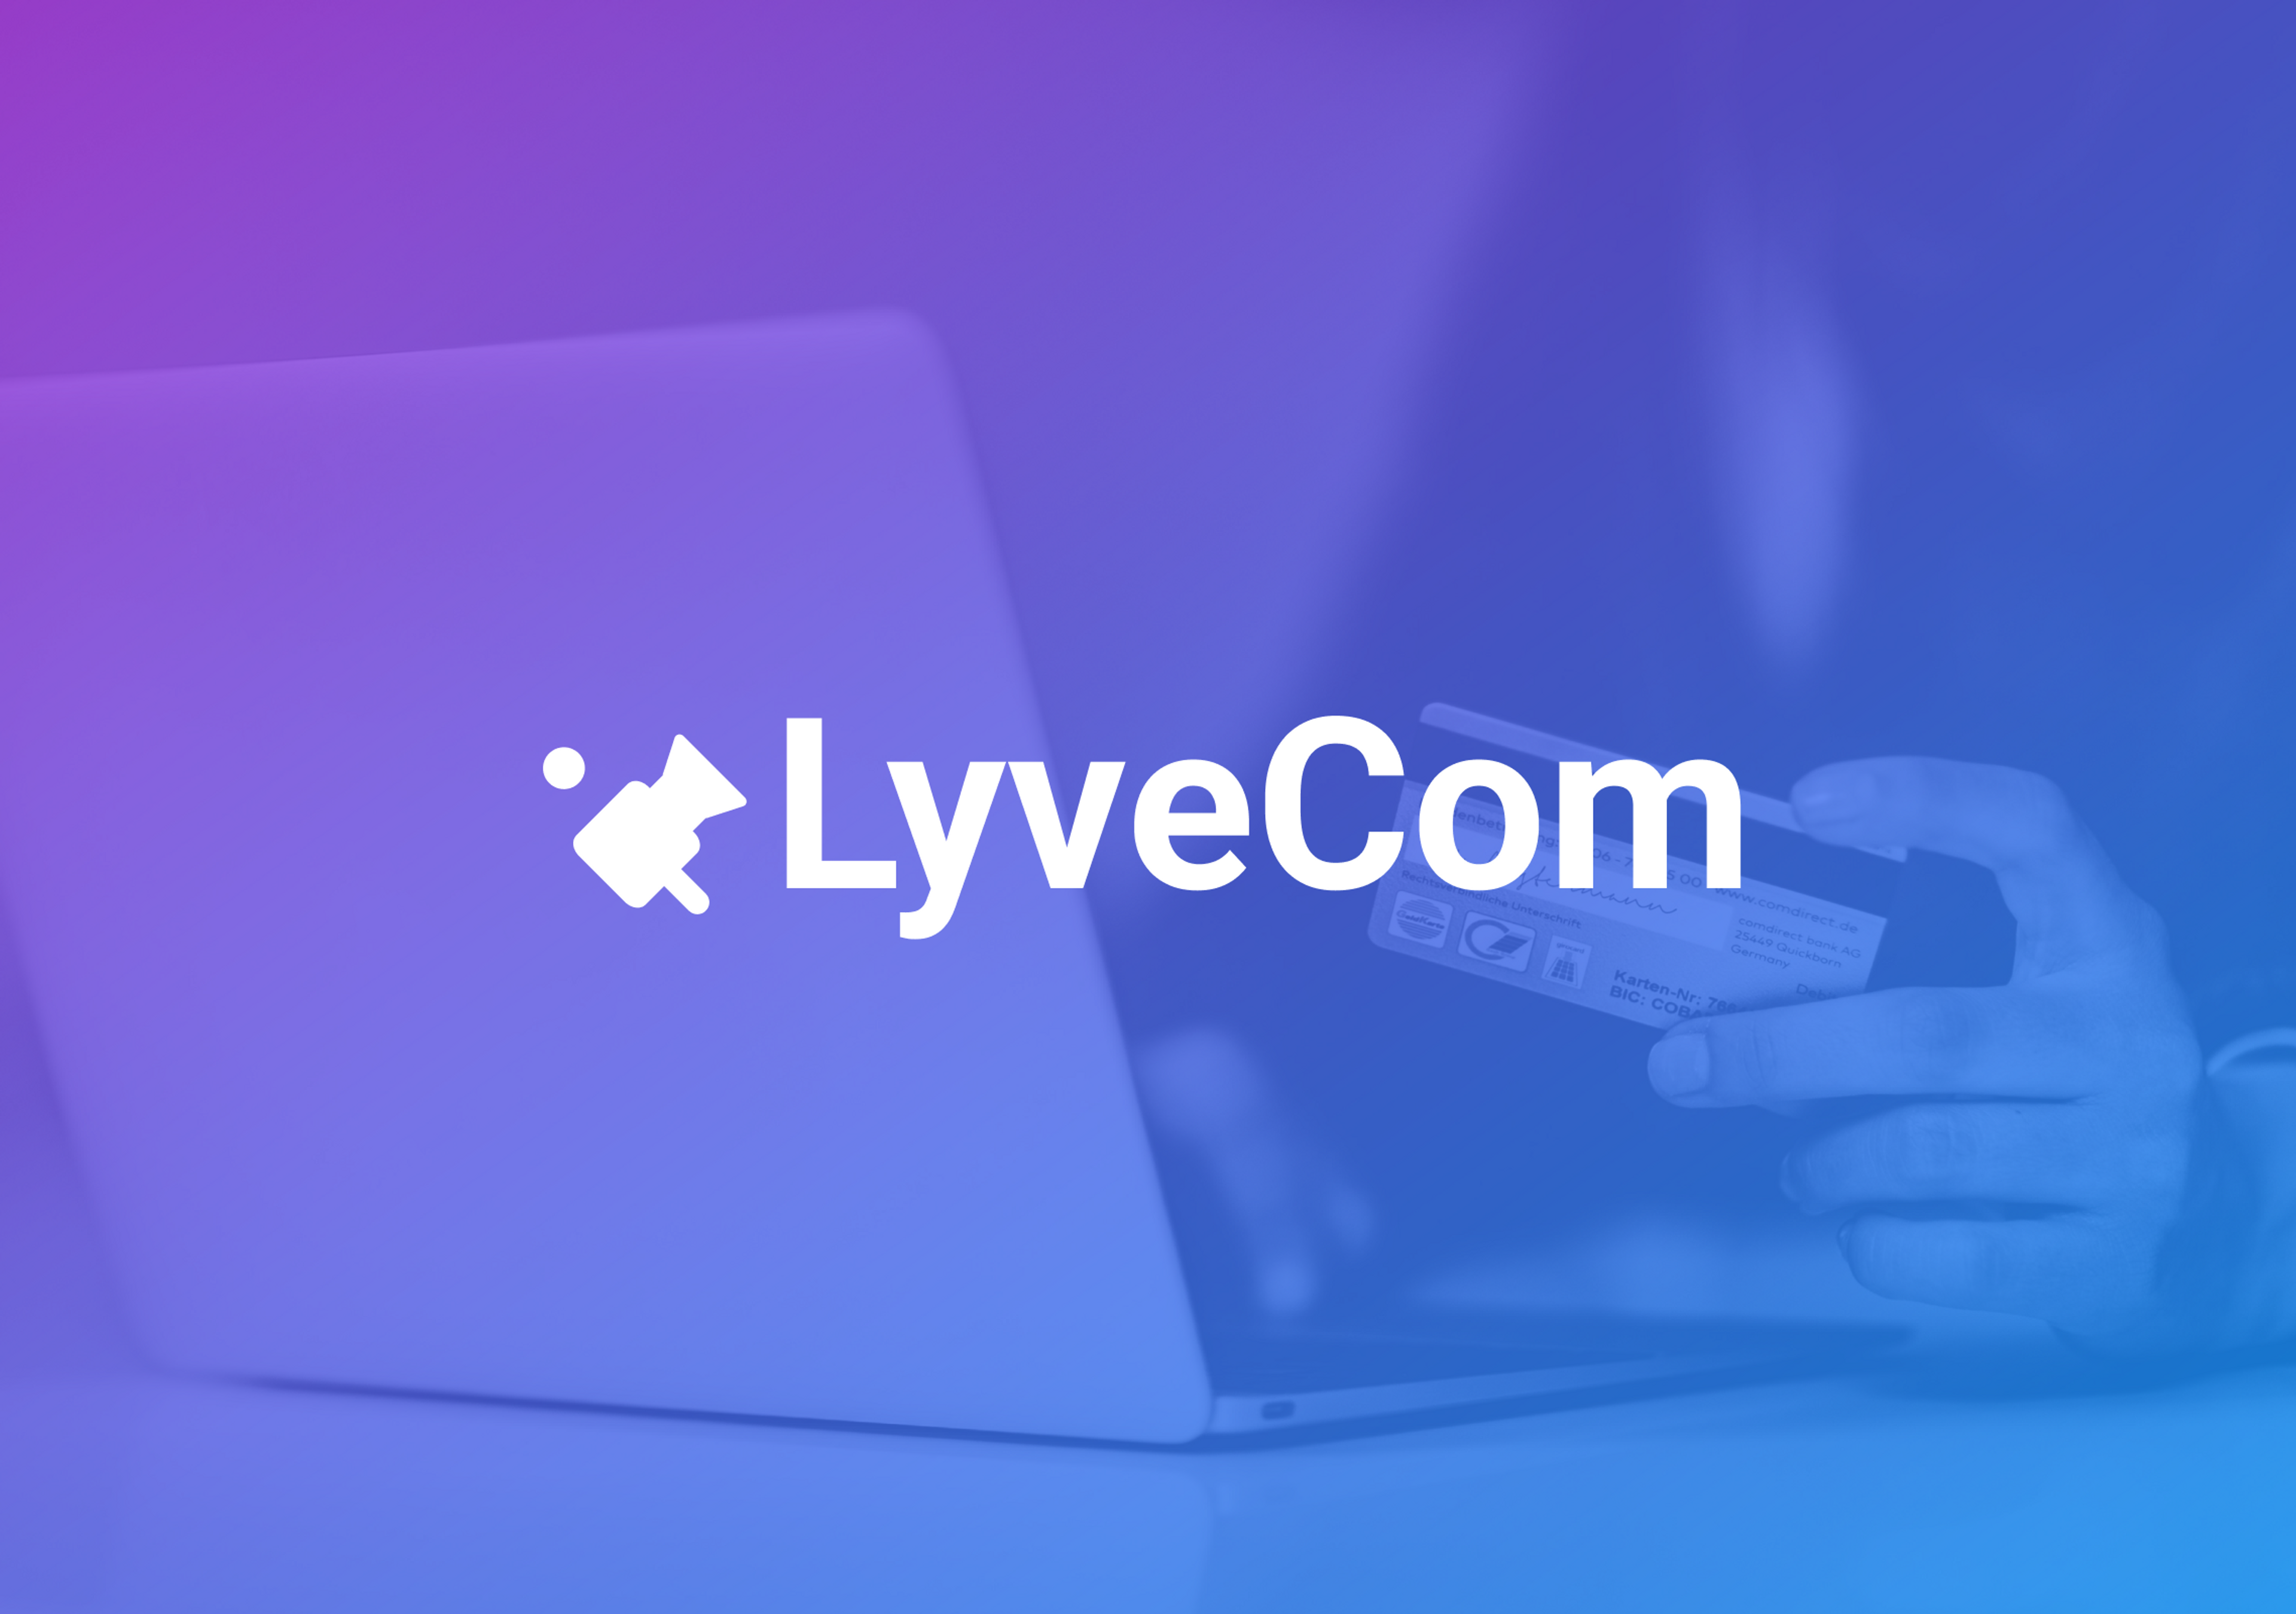 How LyveCom uses Mux to build the best-quality e-commerce video experience 